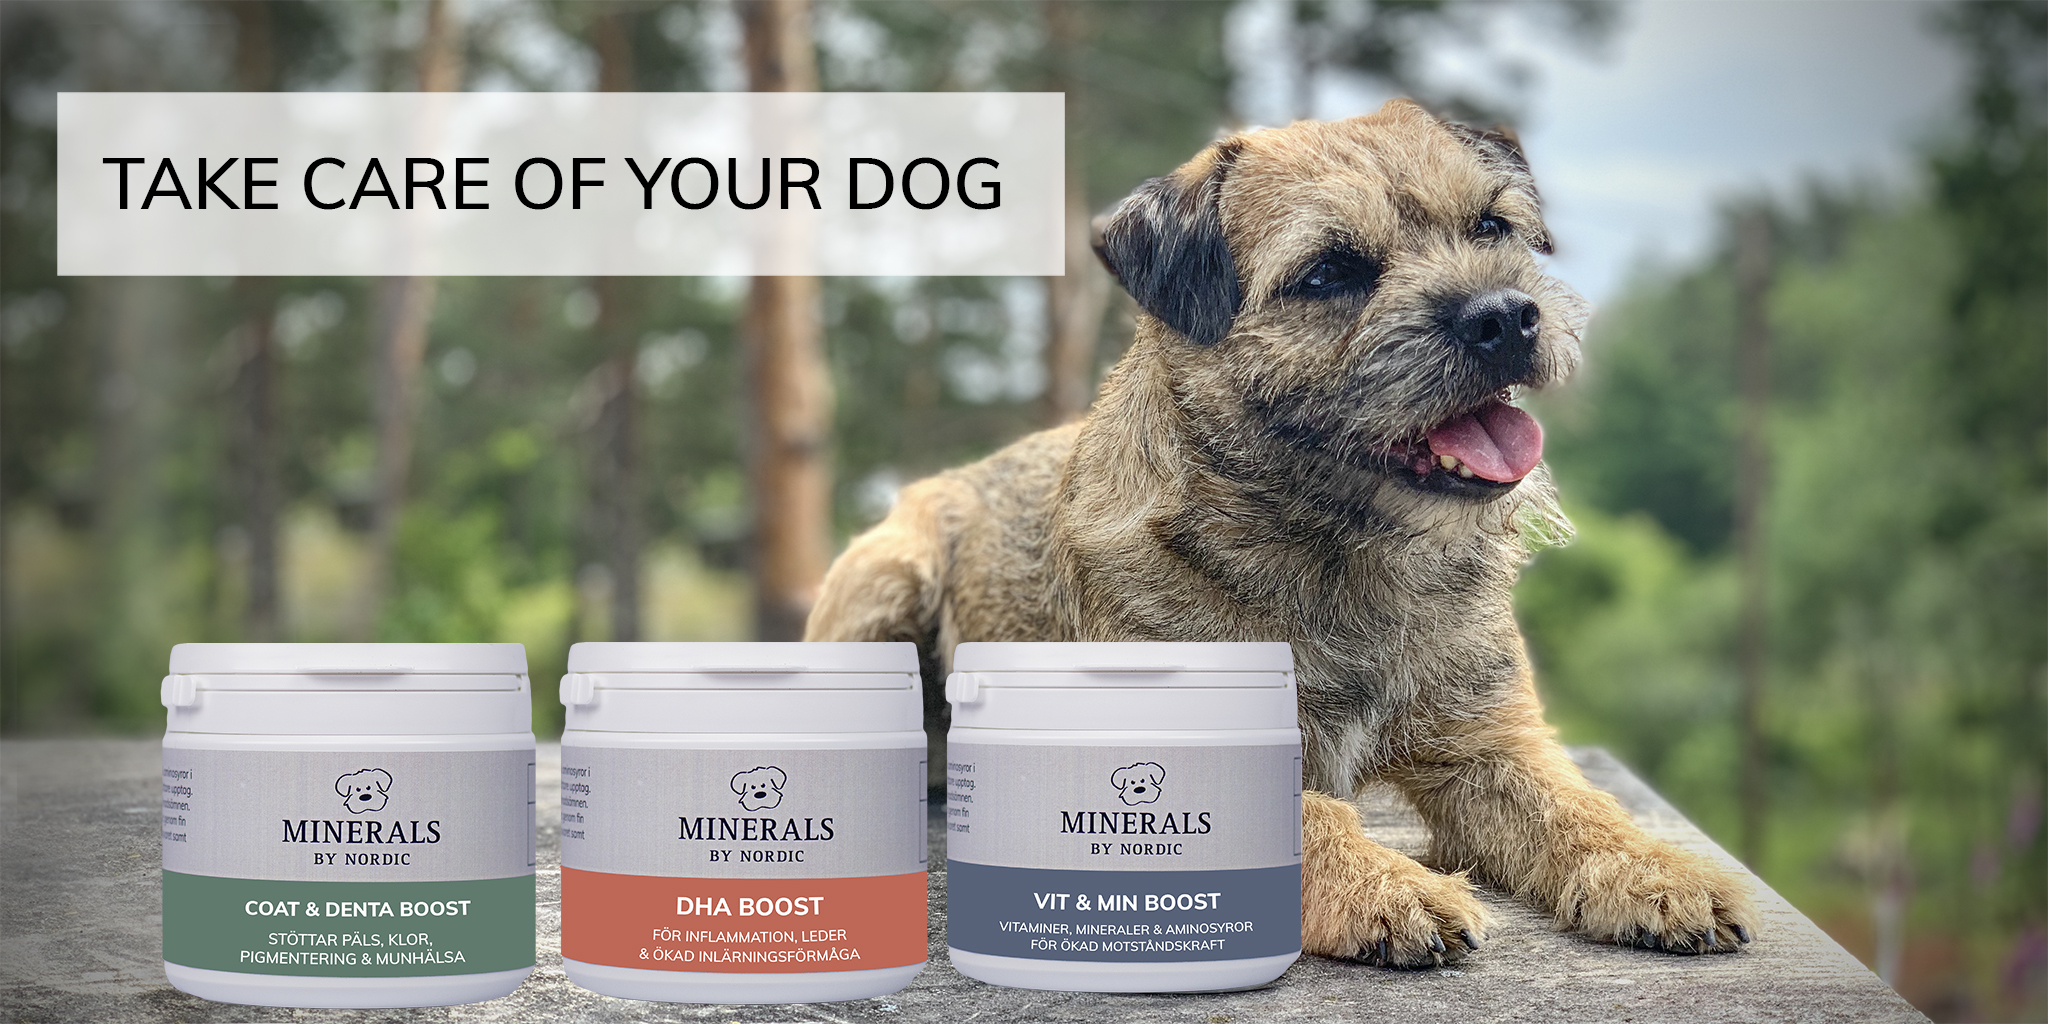 Vitamins & Minerals for dogs